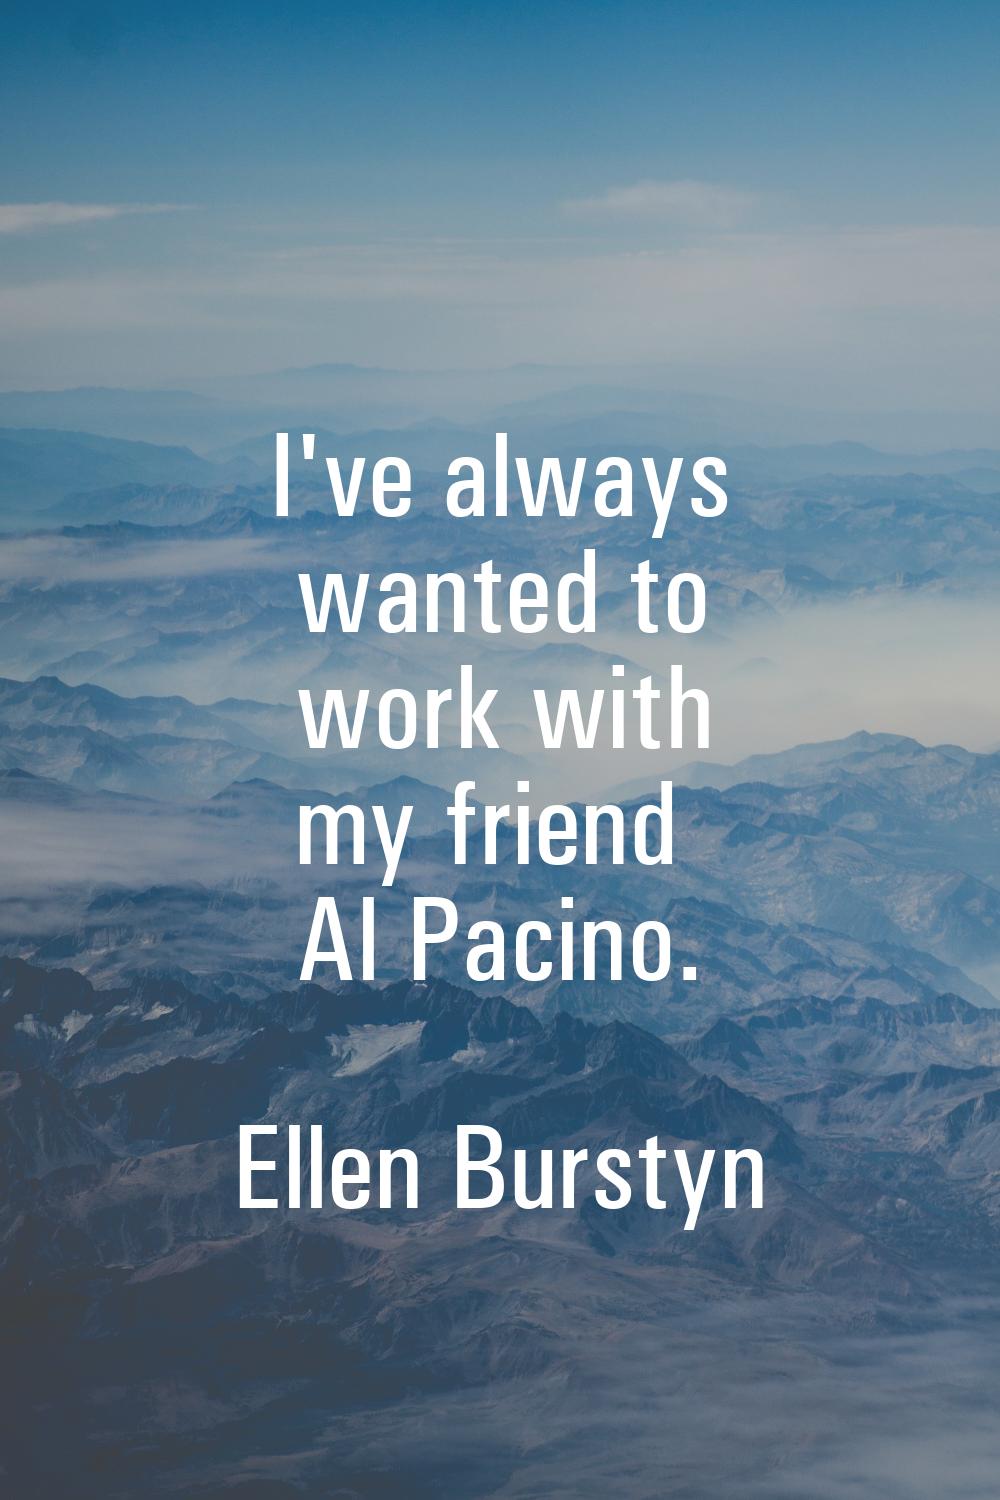 I've always wanted to work with my friend Al Pacino.